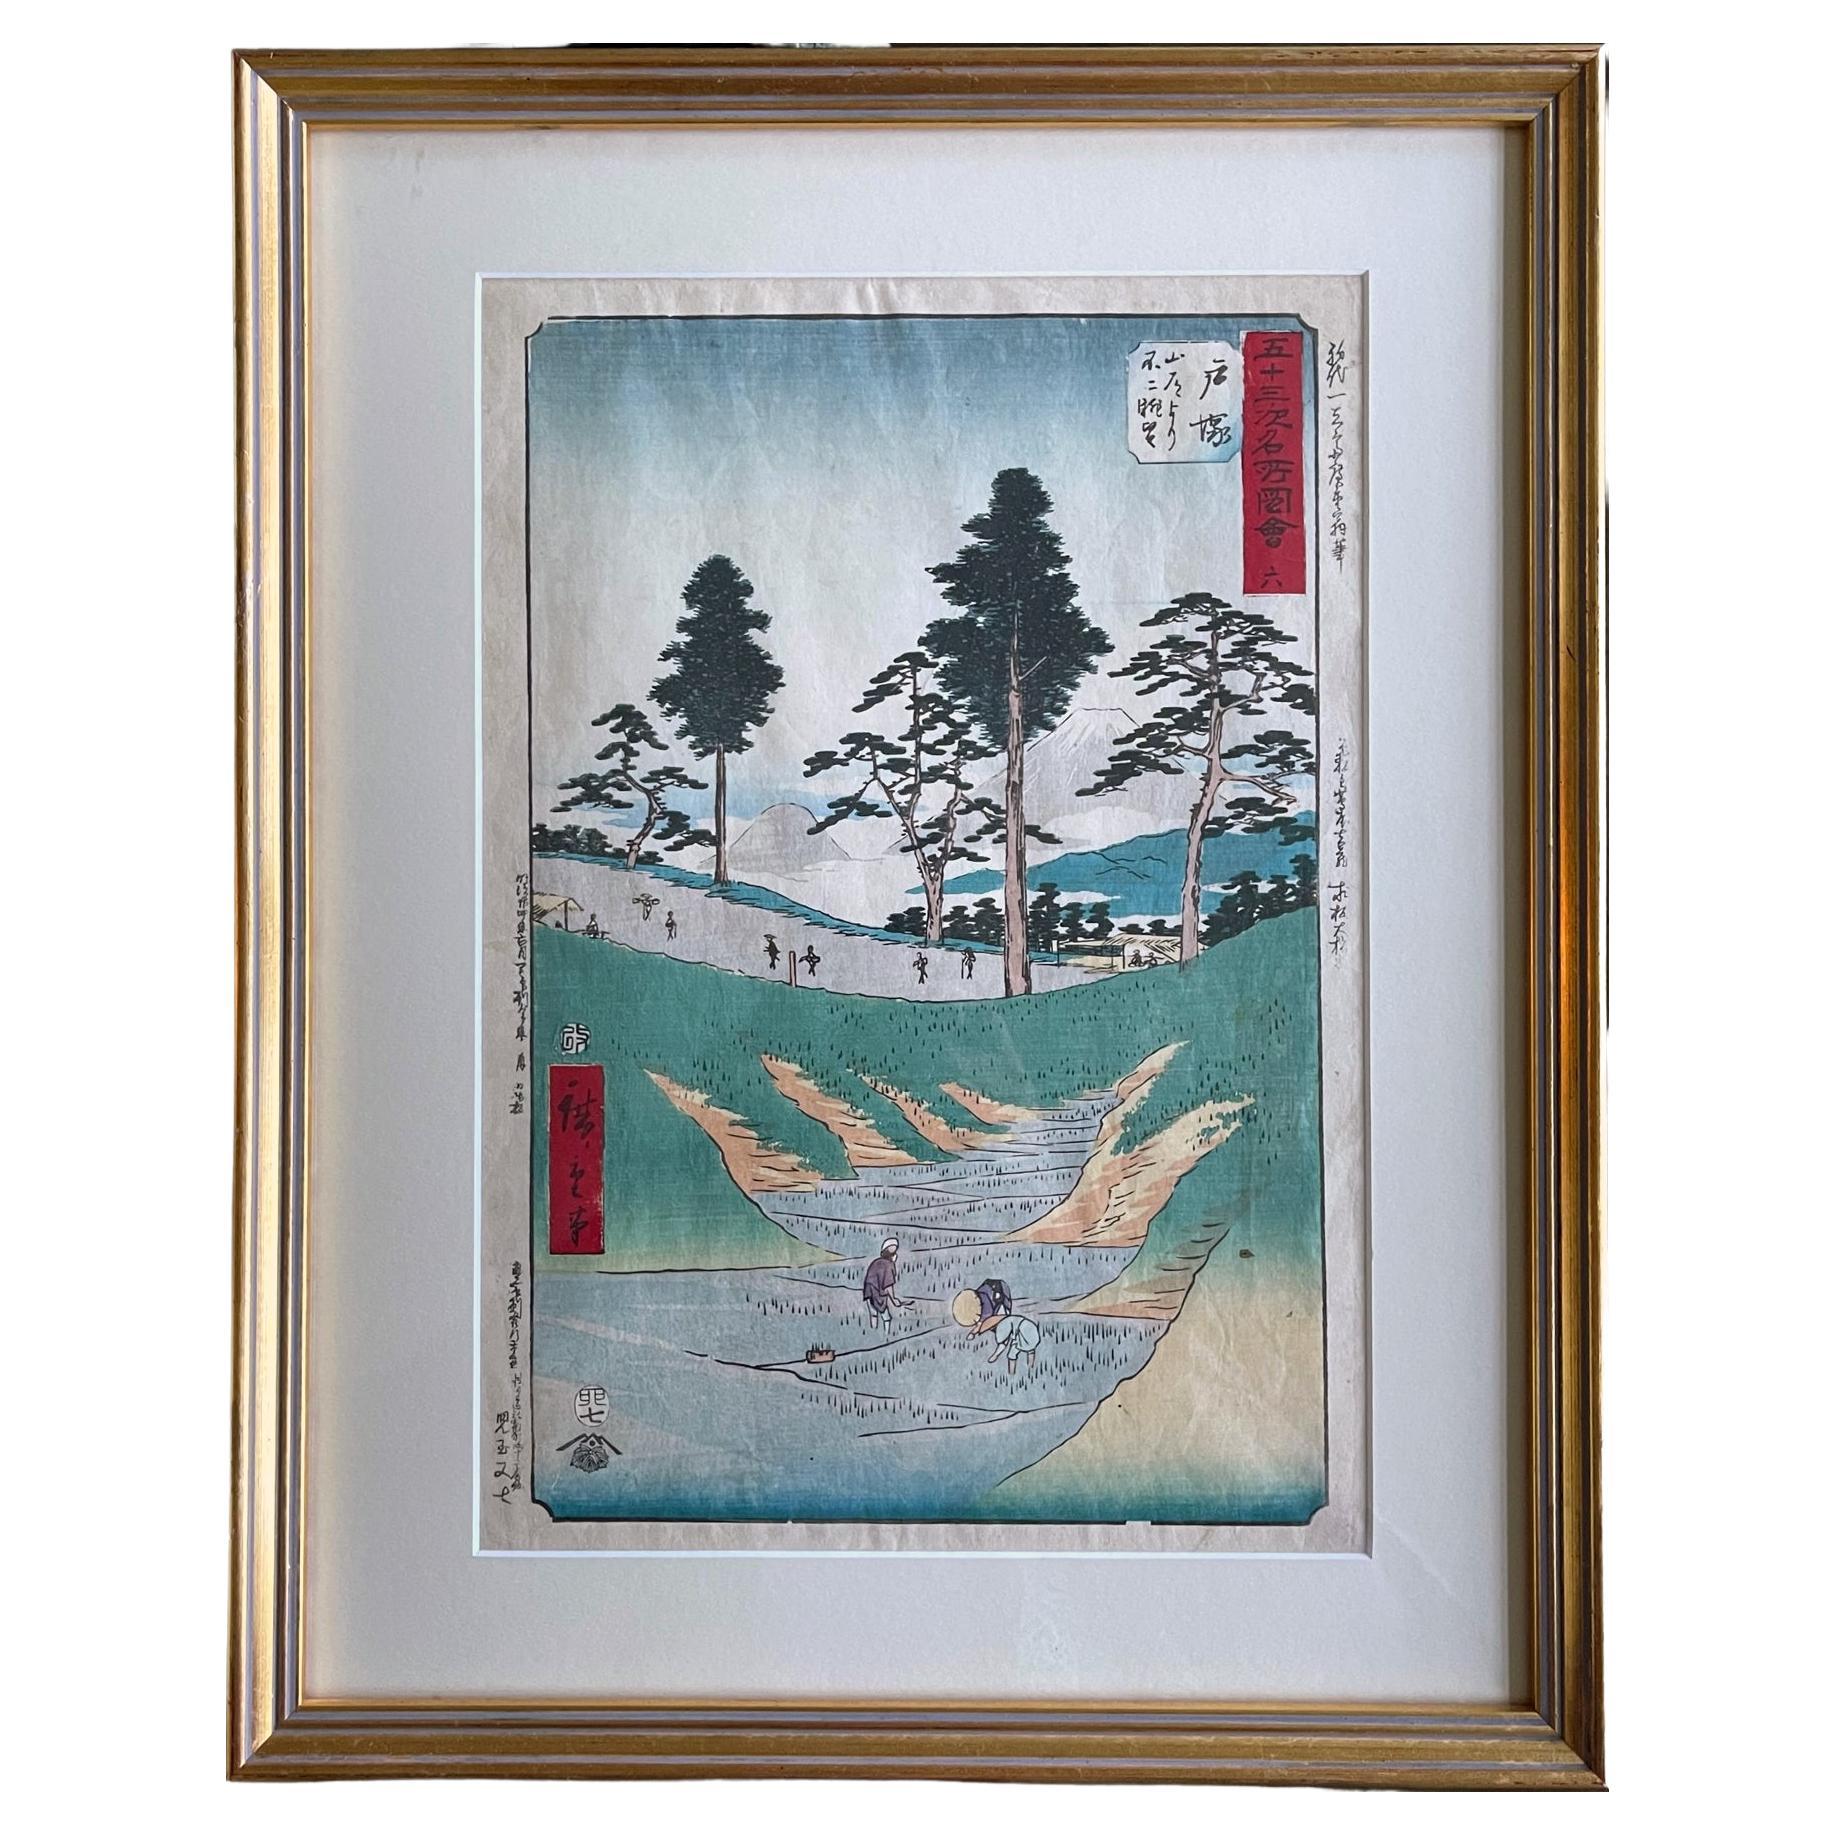 Japanese Woodblock Print the Fifty-Three Stations of the Tokaido by Hiroshige